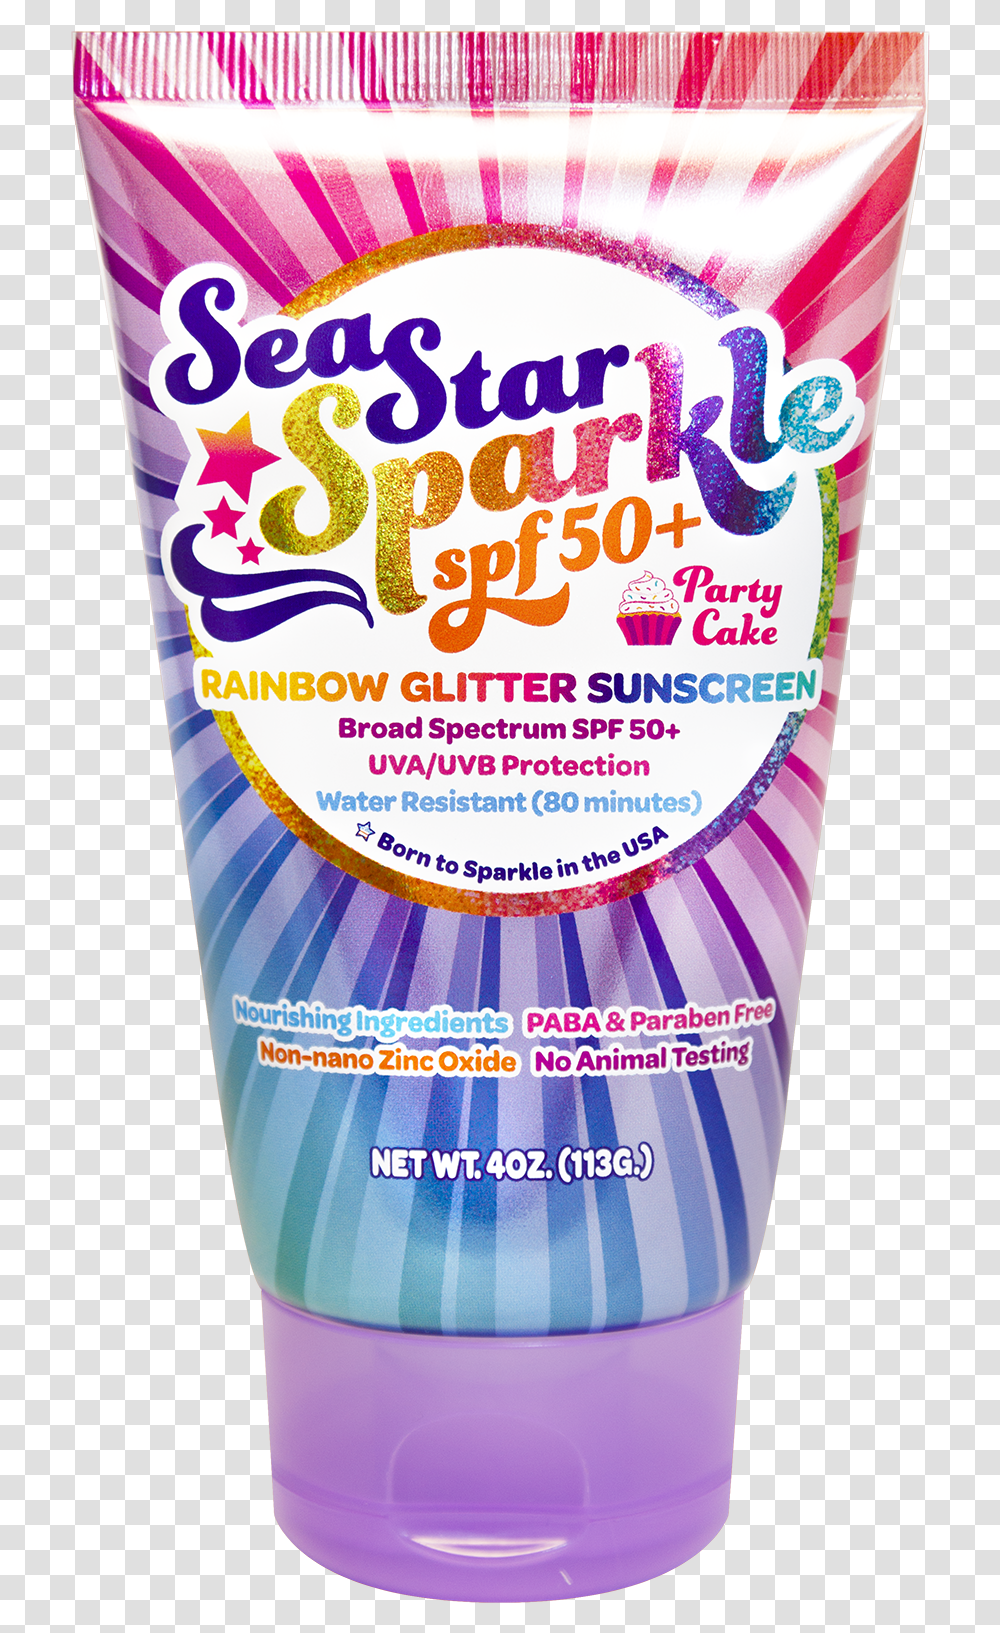 Sea Star Sparkle Spf 50 Party Cake With Rainbow Glitter Glitter Sunscreen, Label, Text, Shampoo, Bottle Transparent Png